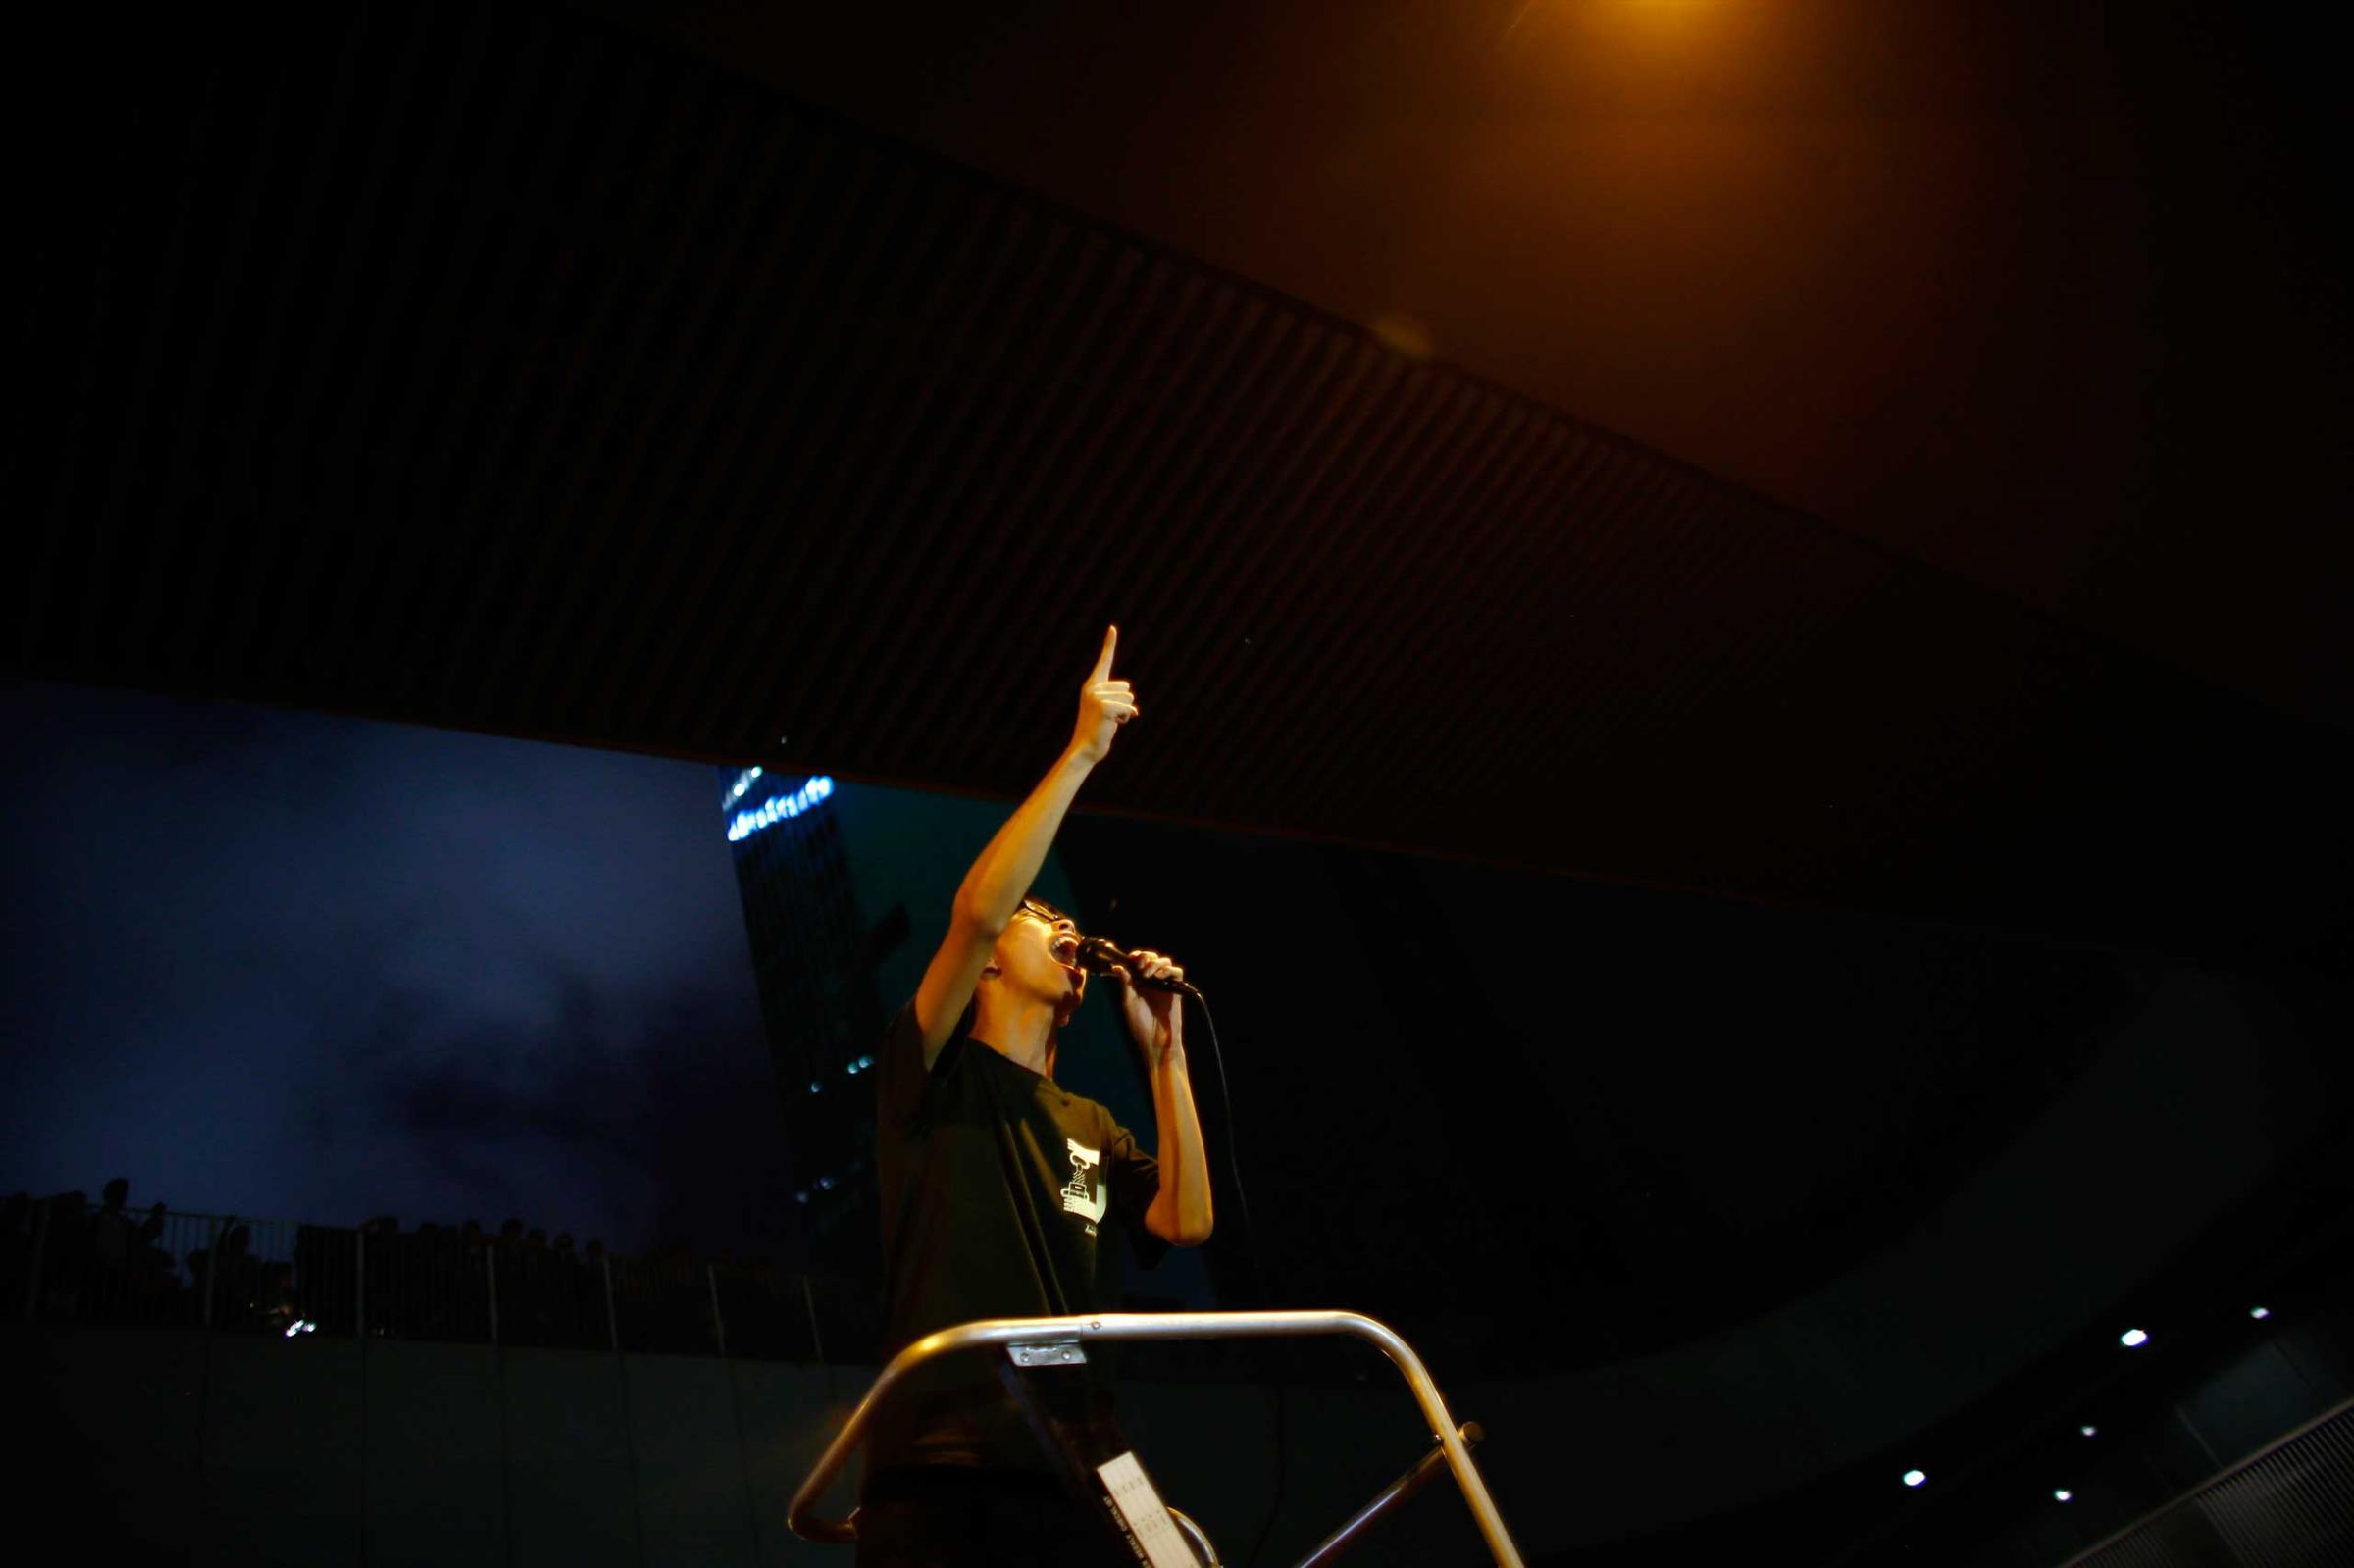 Joshua Wong, leader of the student movement, delivers a speech as protesters block the main street to the financial Central district, outside the government headquarters building in Hong Kong Oct. 1, 2014.